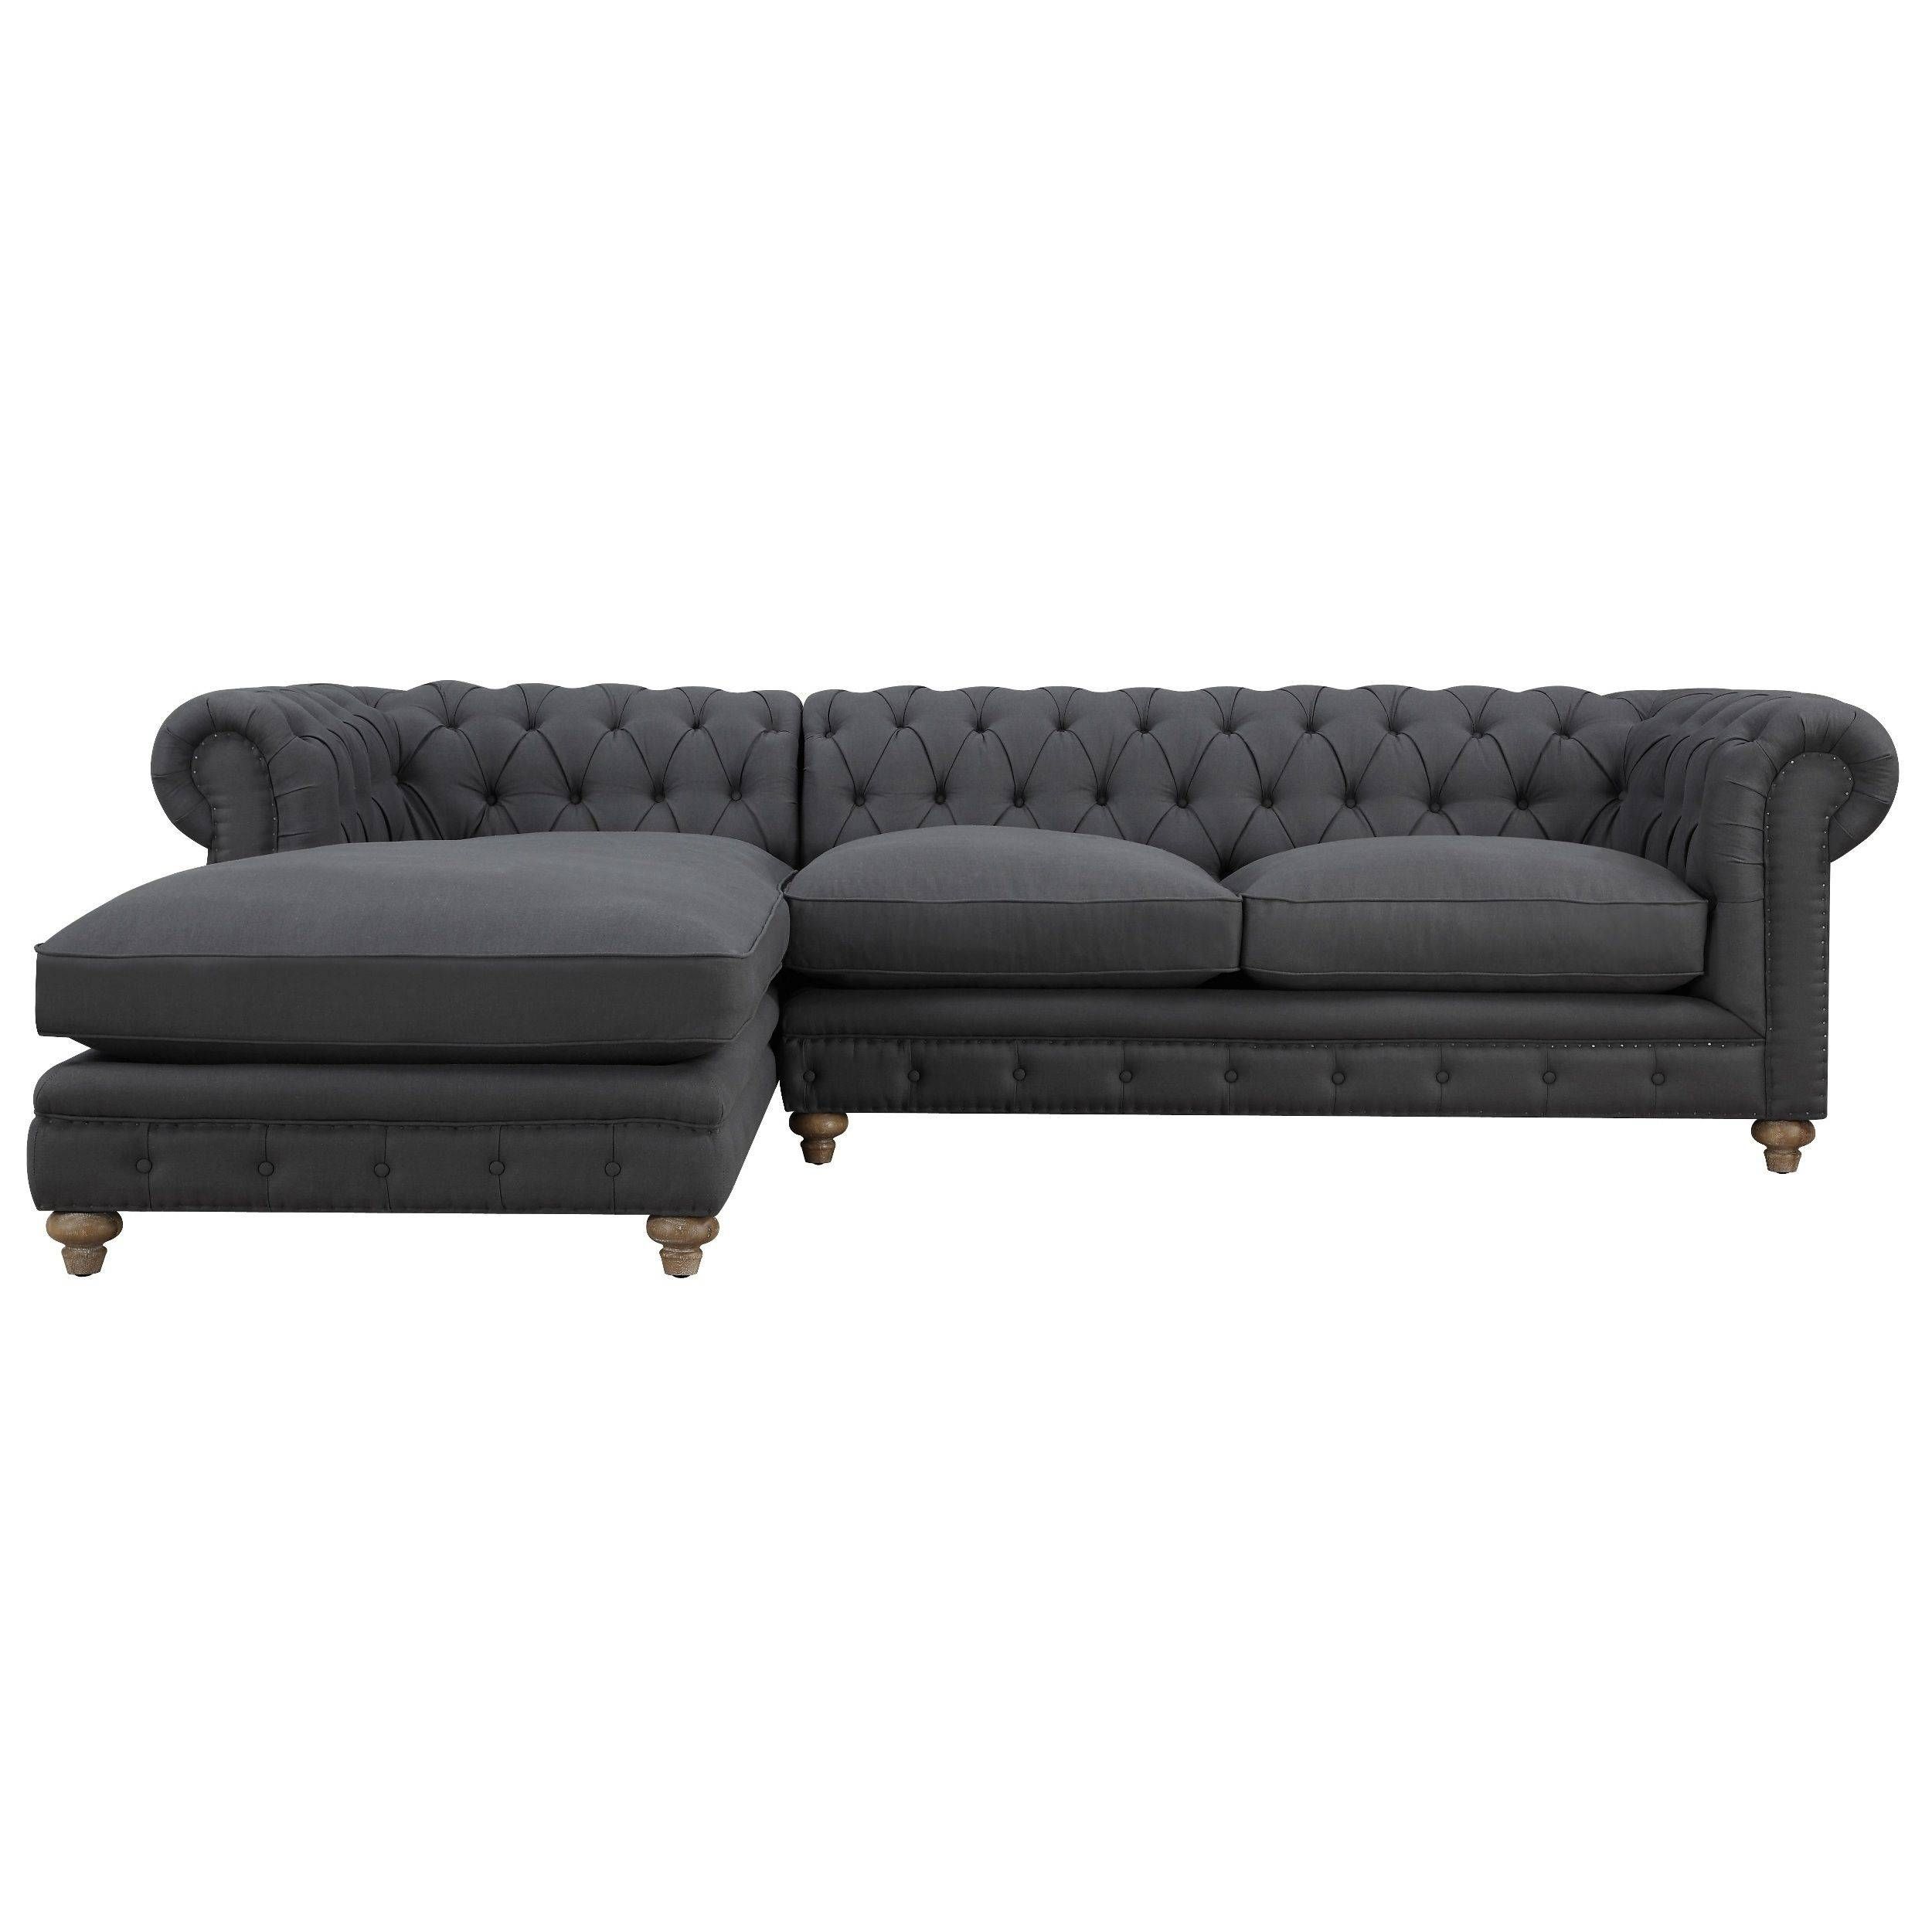 Sofa: Comfort And Style Is Evident In This Dynamic With Tufted Throughout Sofas And Sectionals (Photo 20 of 30)